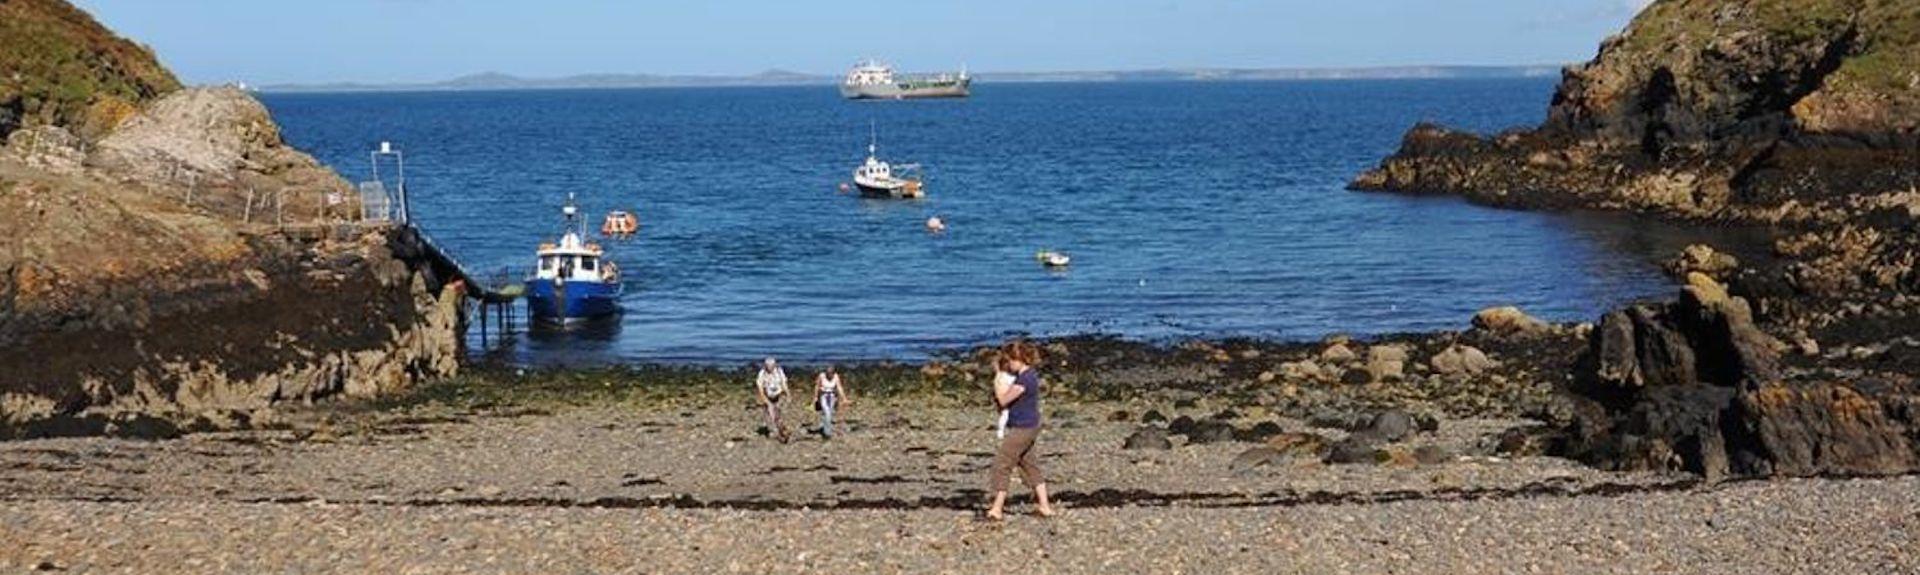 A shingle beach with an upturned rowing boat in the foreground and people walking nestles between two rocky headlands. A small fishing boat is moored to a jetty. Out to sea a large tanker heads towards the horizon.